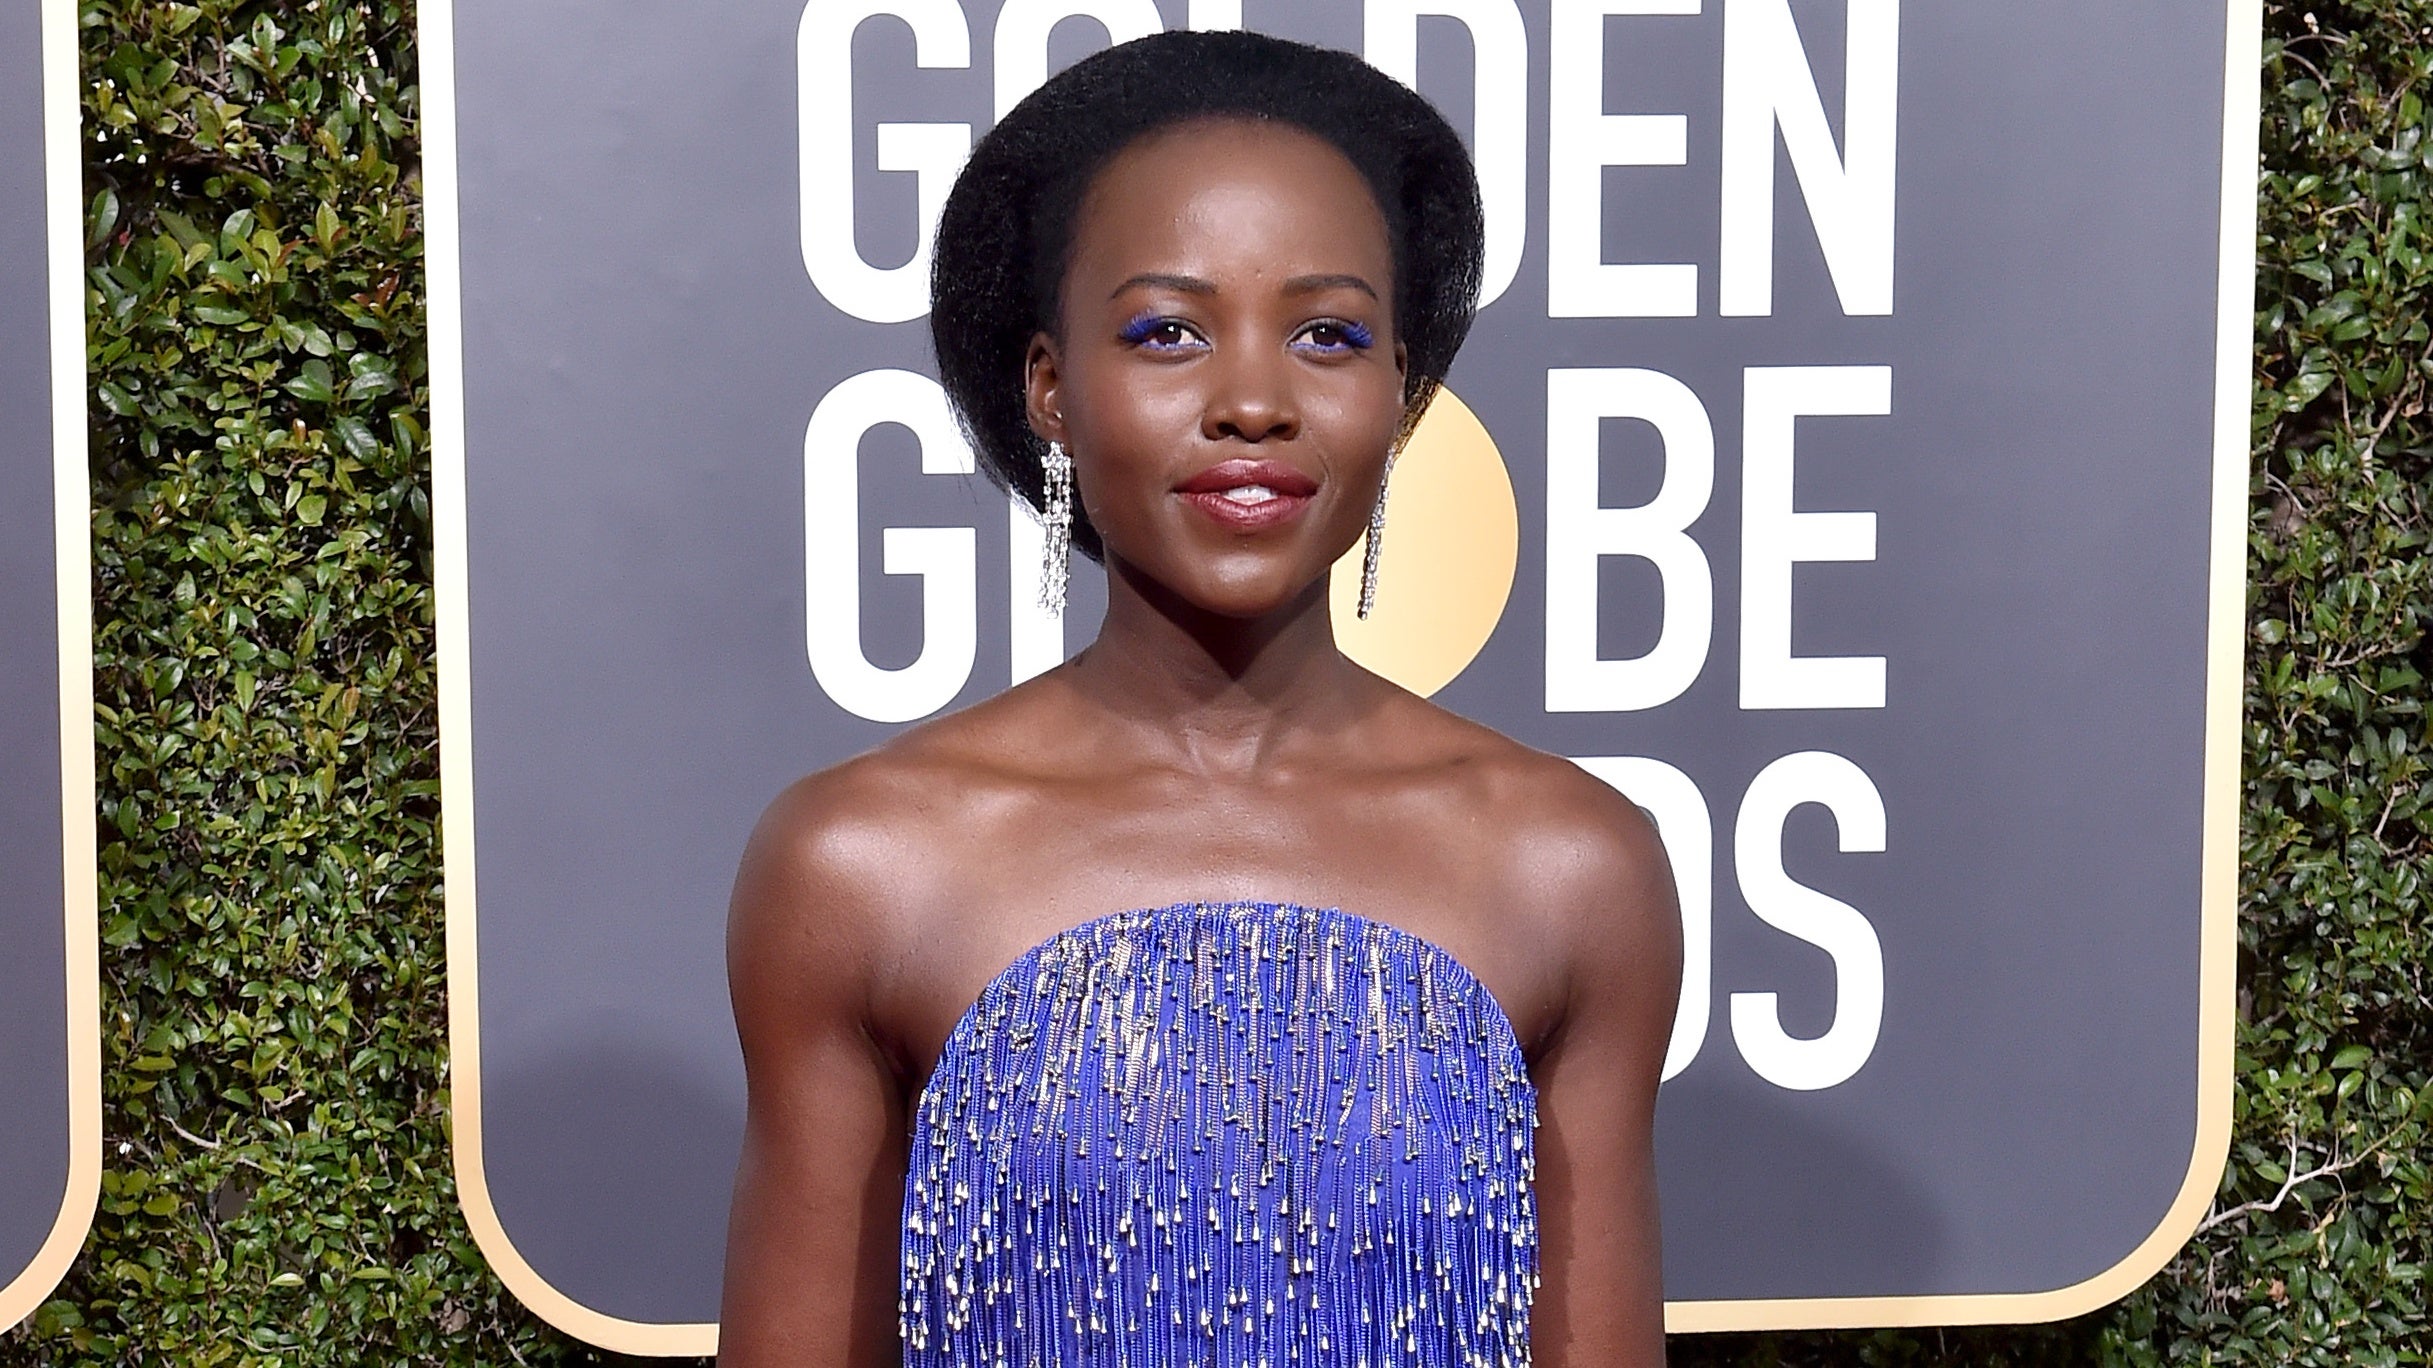 The Best 2019 Golden Globes Fashion Moments